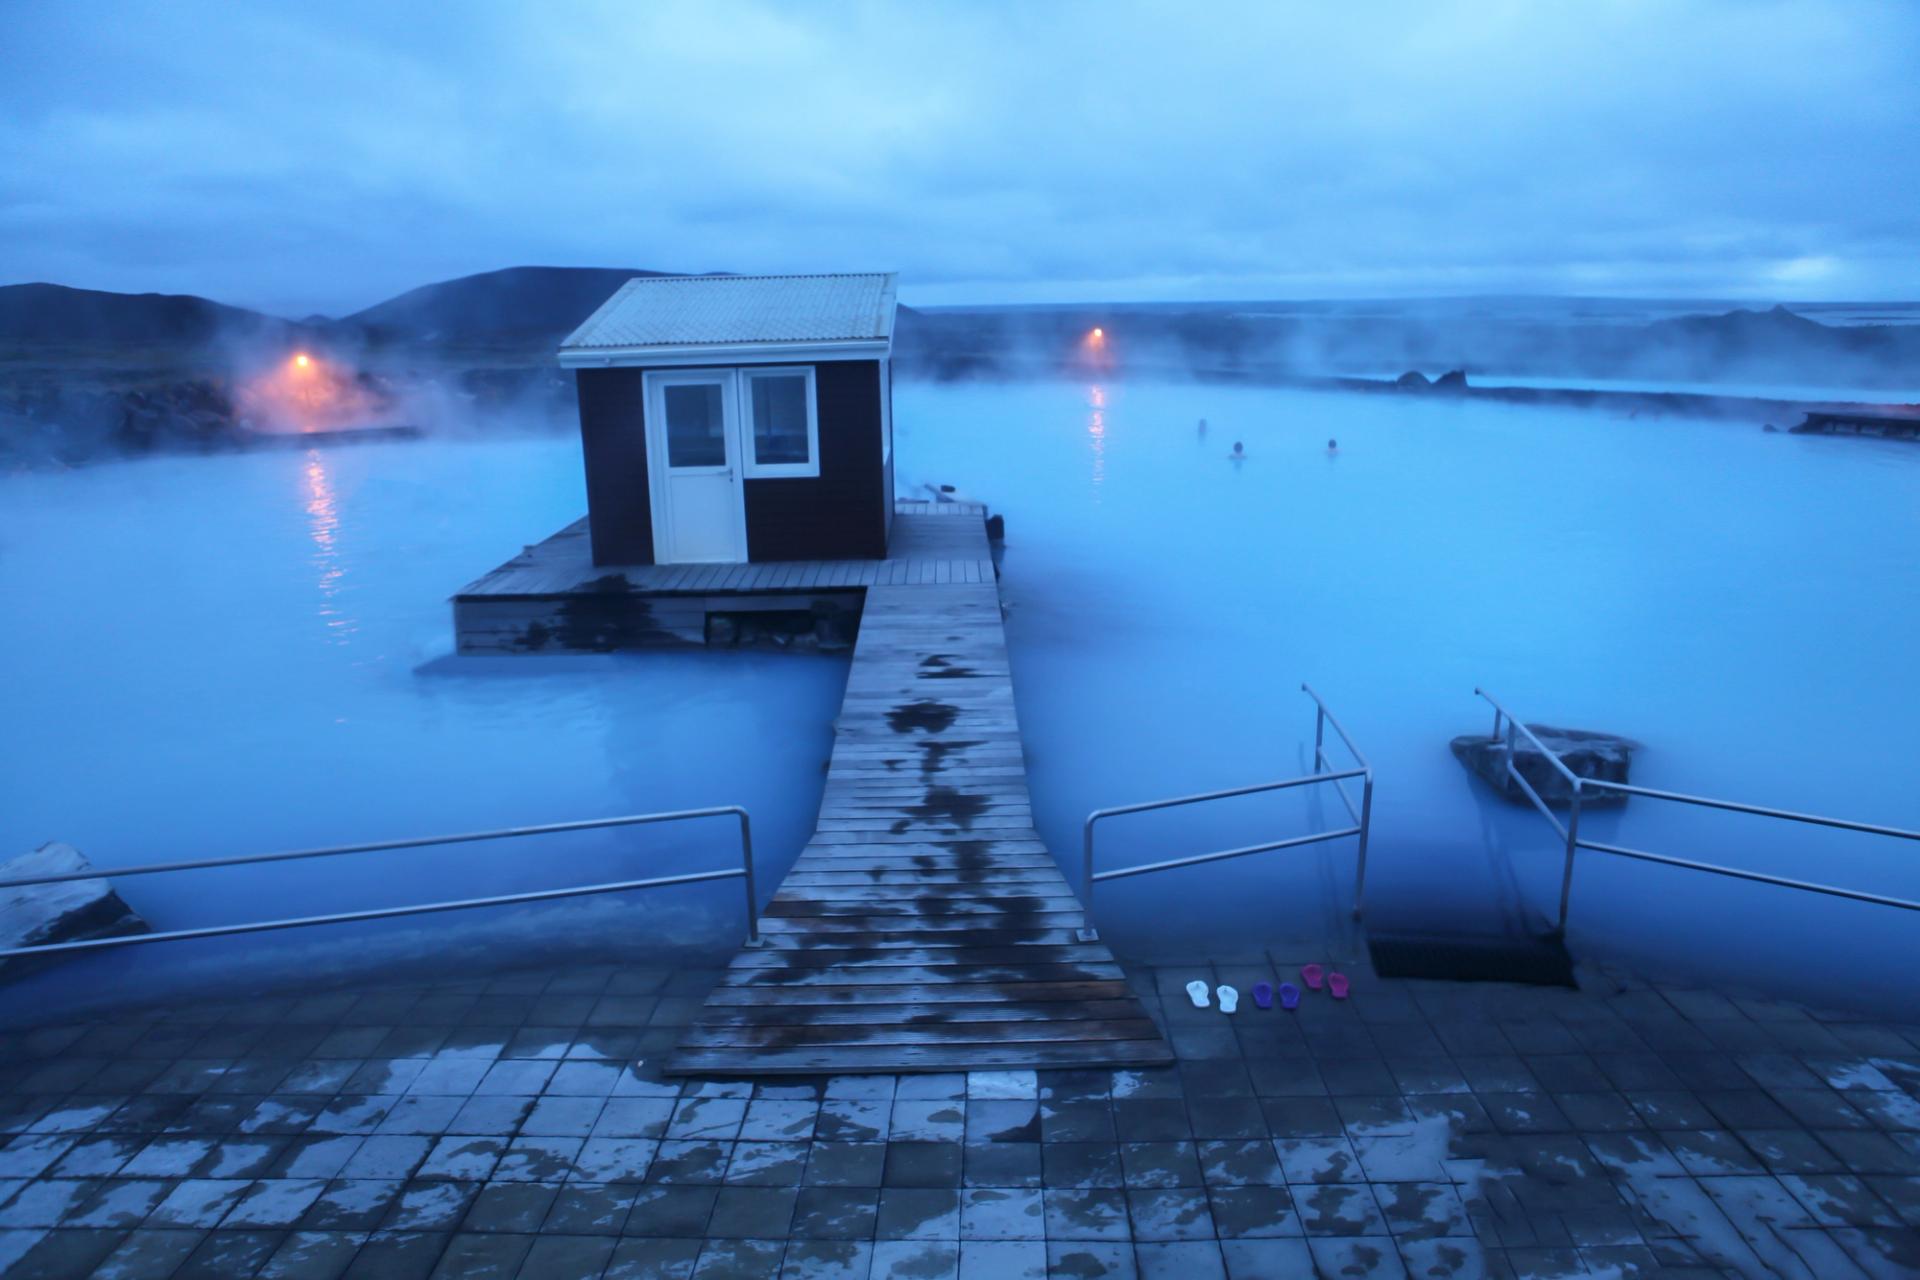 Hot springs in iceland: myvatn nature baths a Mineral-Rich famous hot spring in North Iceland.